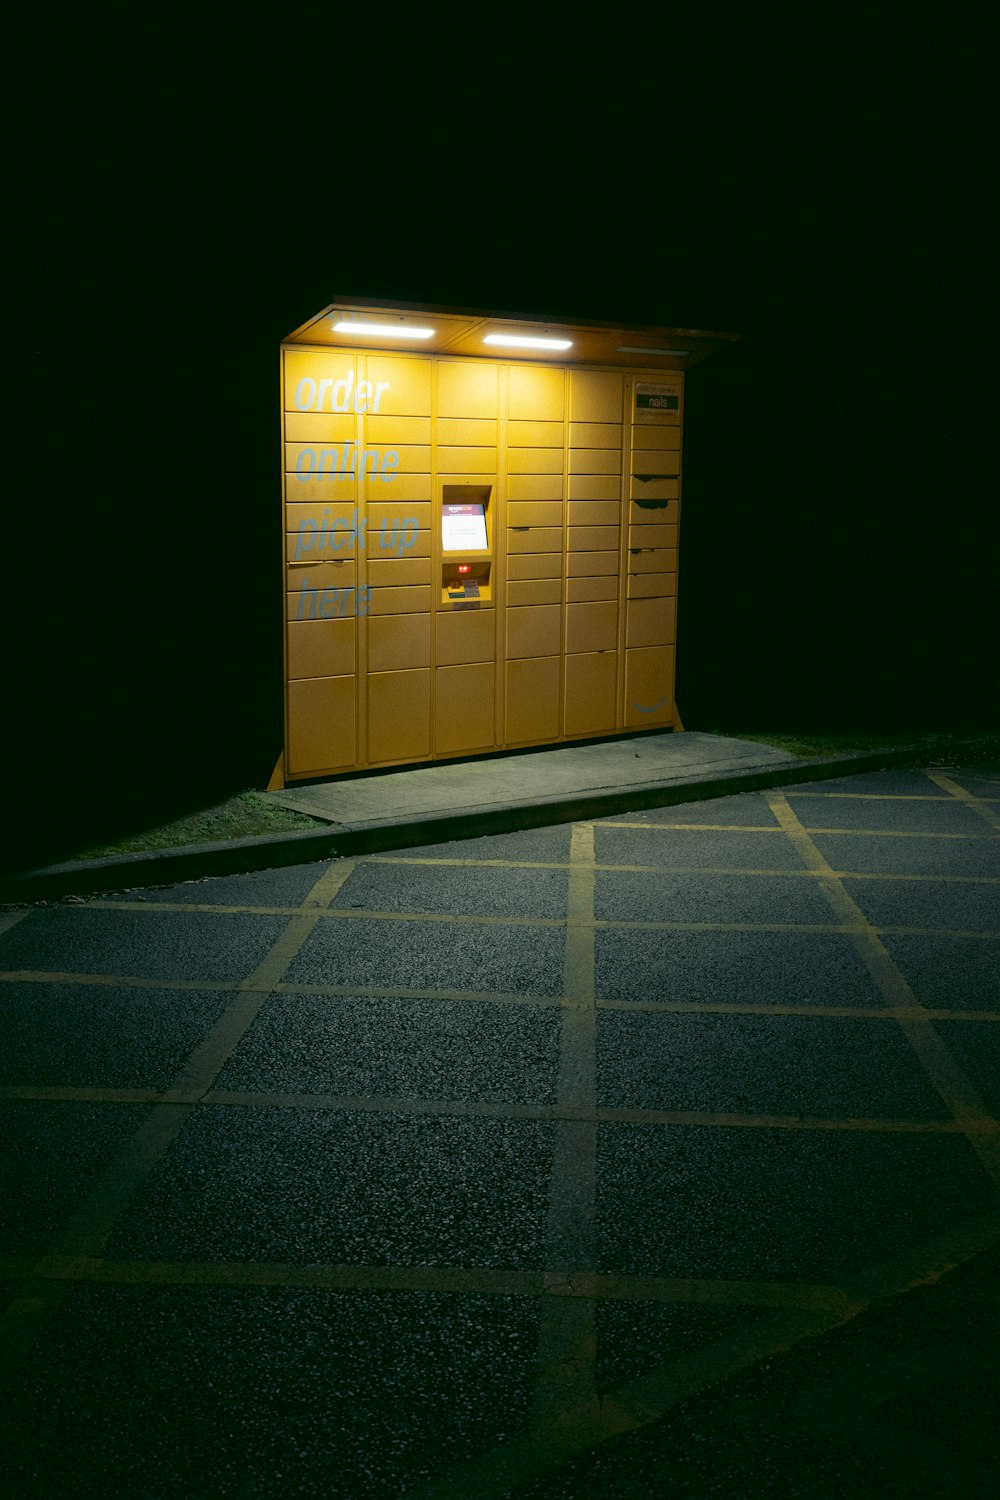 a yellow phone booth sitting in the middle of a parking lot